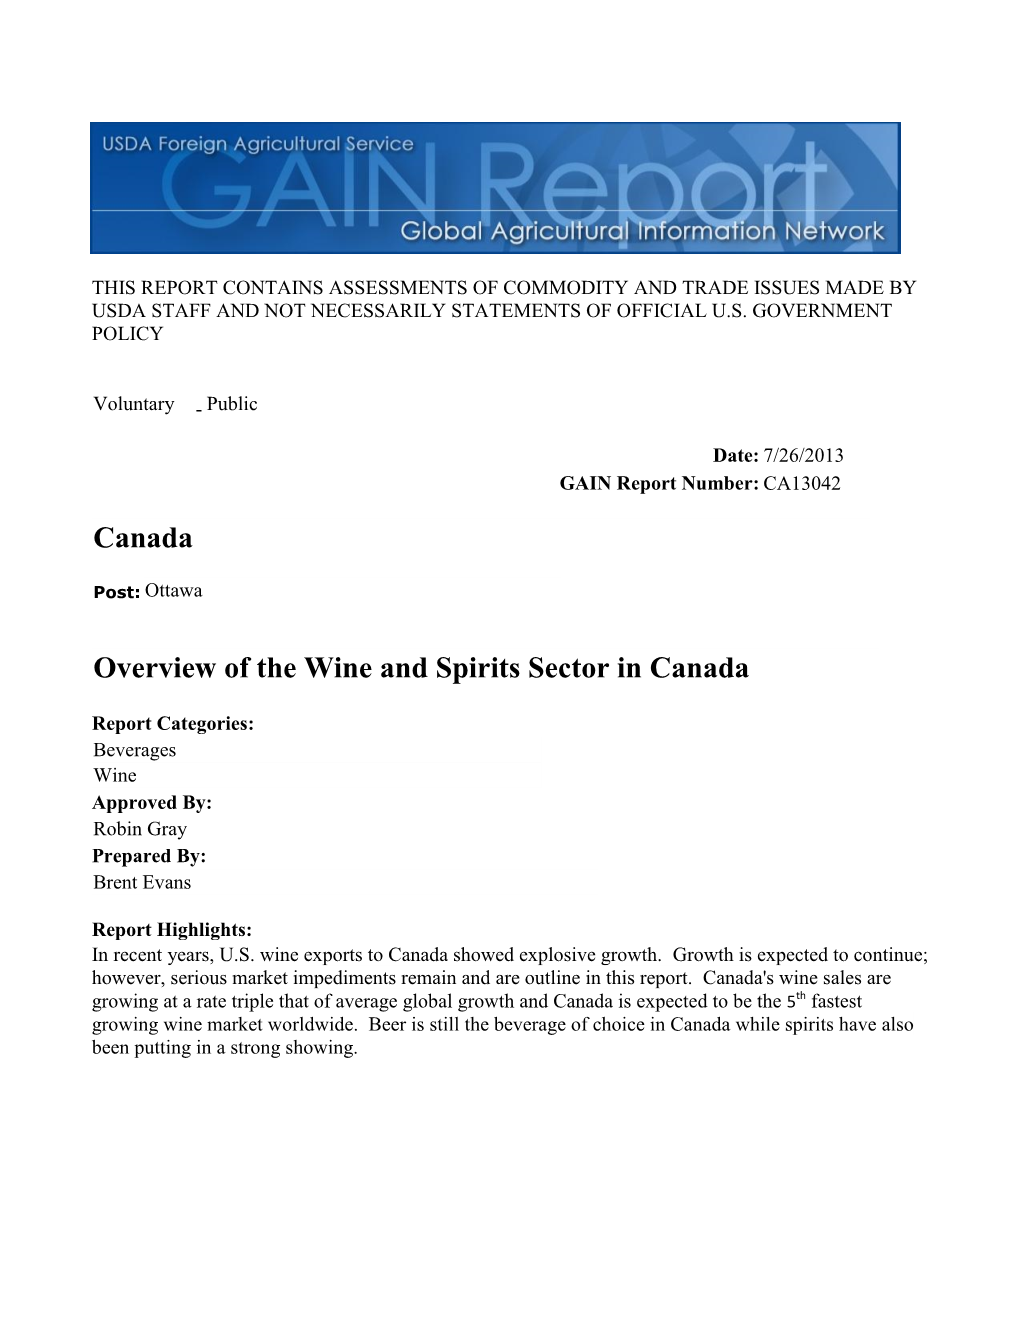 Overview of the Wine and Spirits Sector in Canada Canada